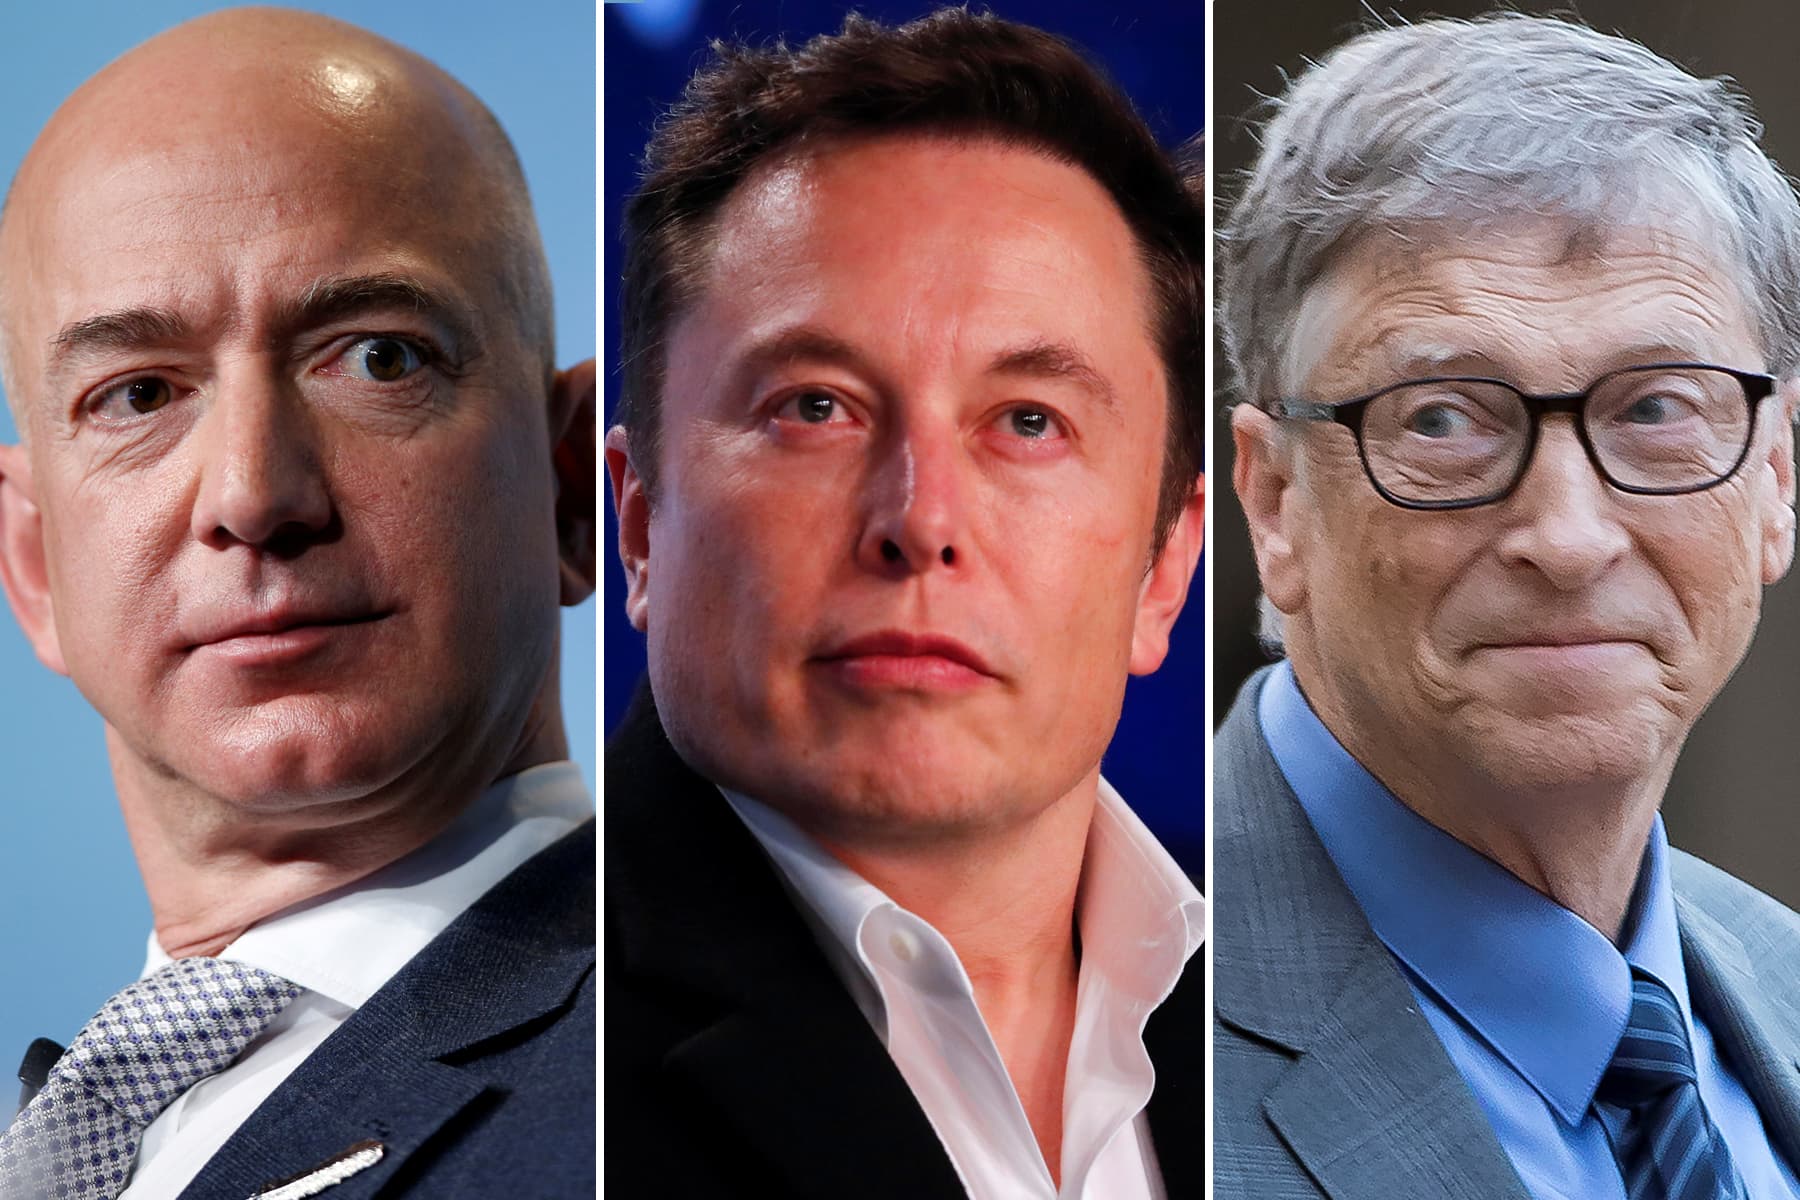 Tech billionaires are obsessed with climate change — but some question if they’re focusing on the right areas